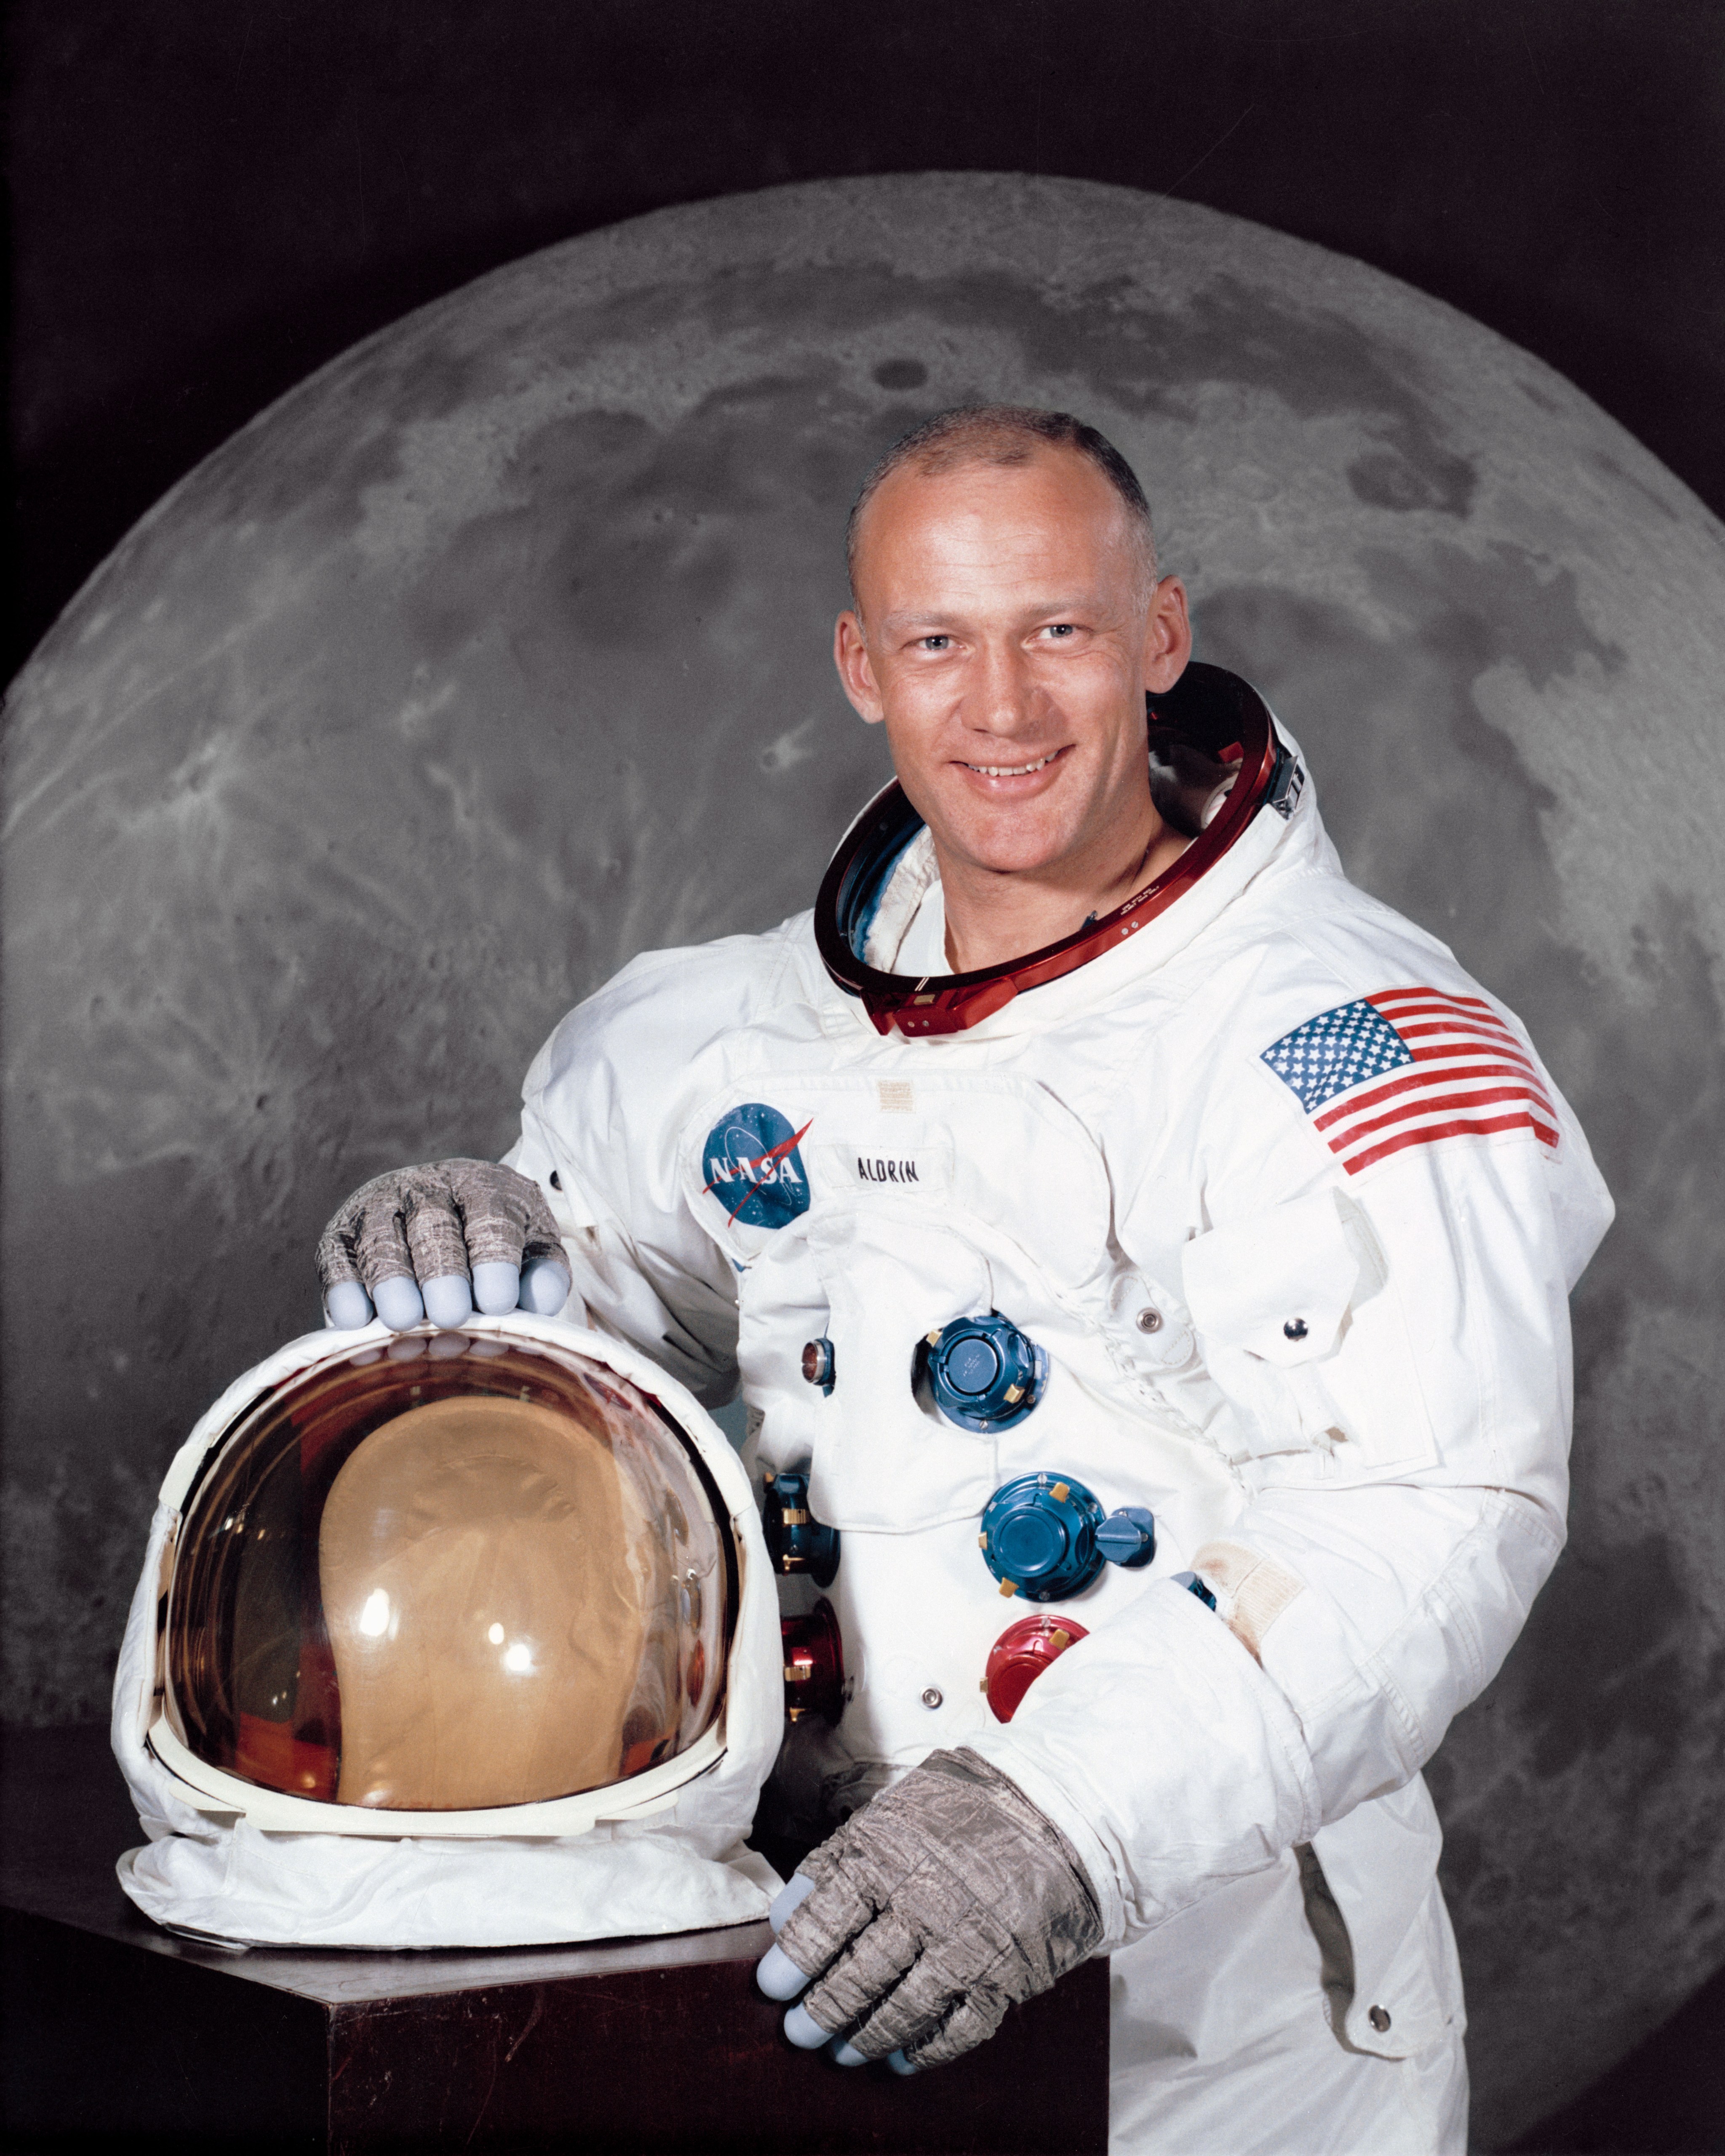 Headshot of man in a white space suit holding a helmet in front of a backdrop photo of the moon